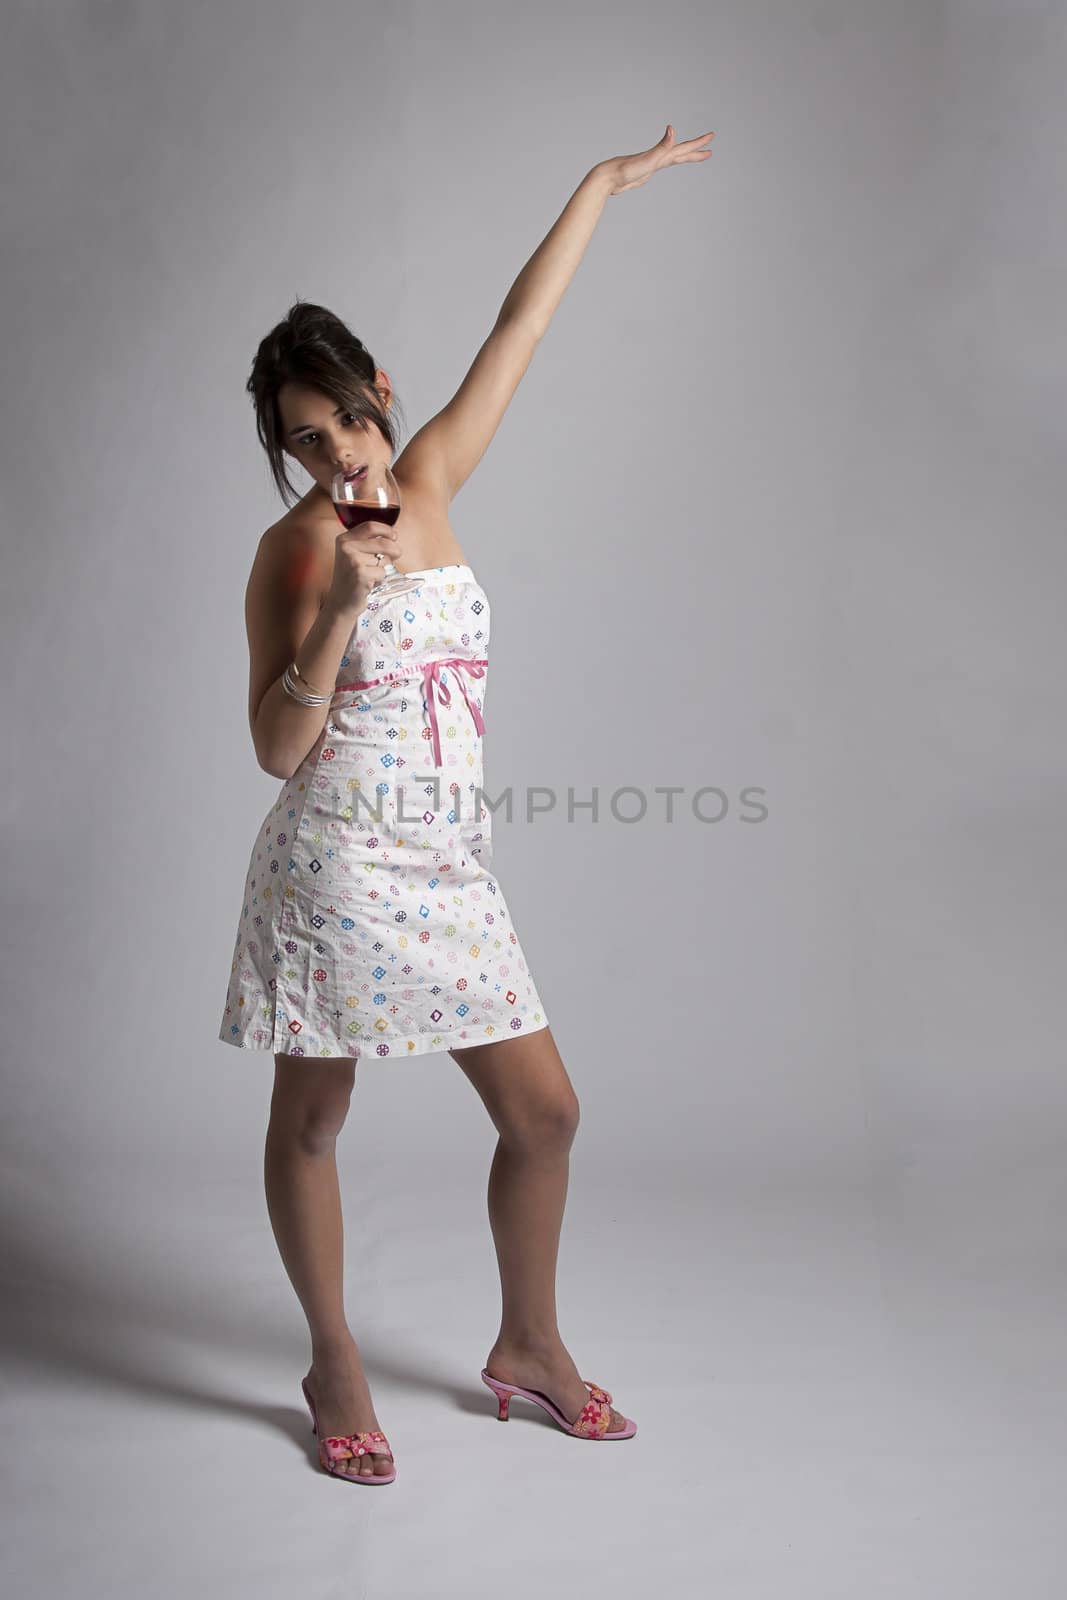 Girl dancing with a glass of red wine